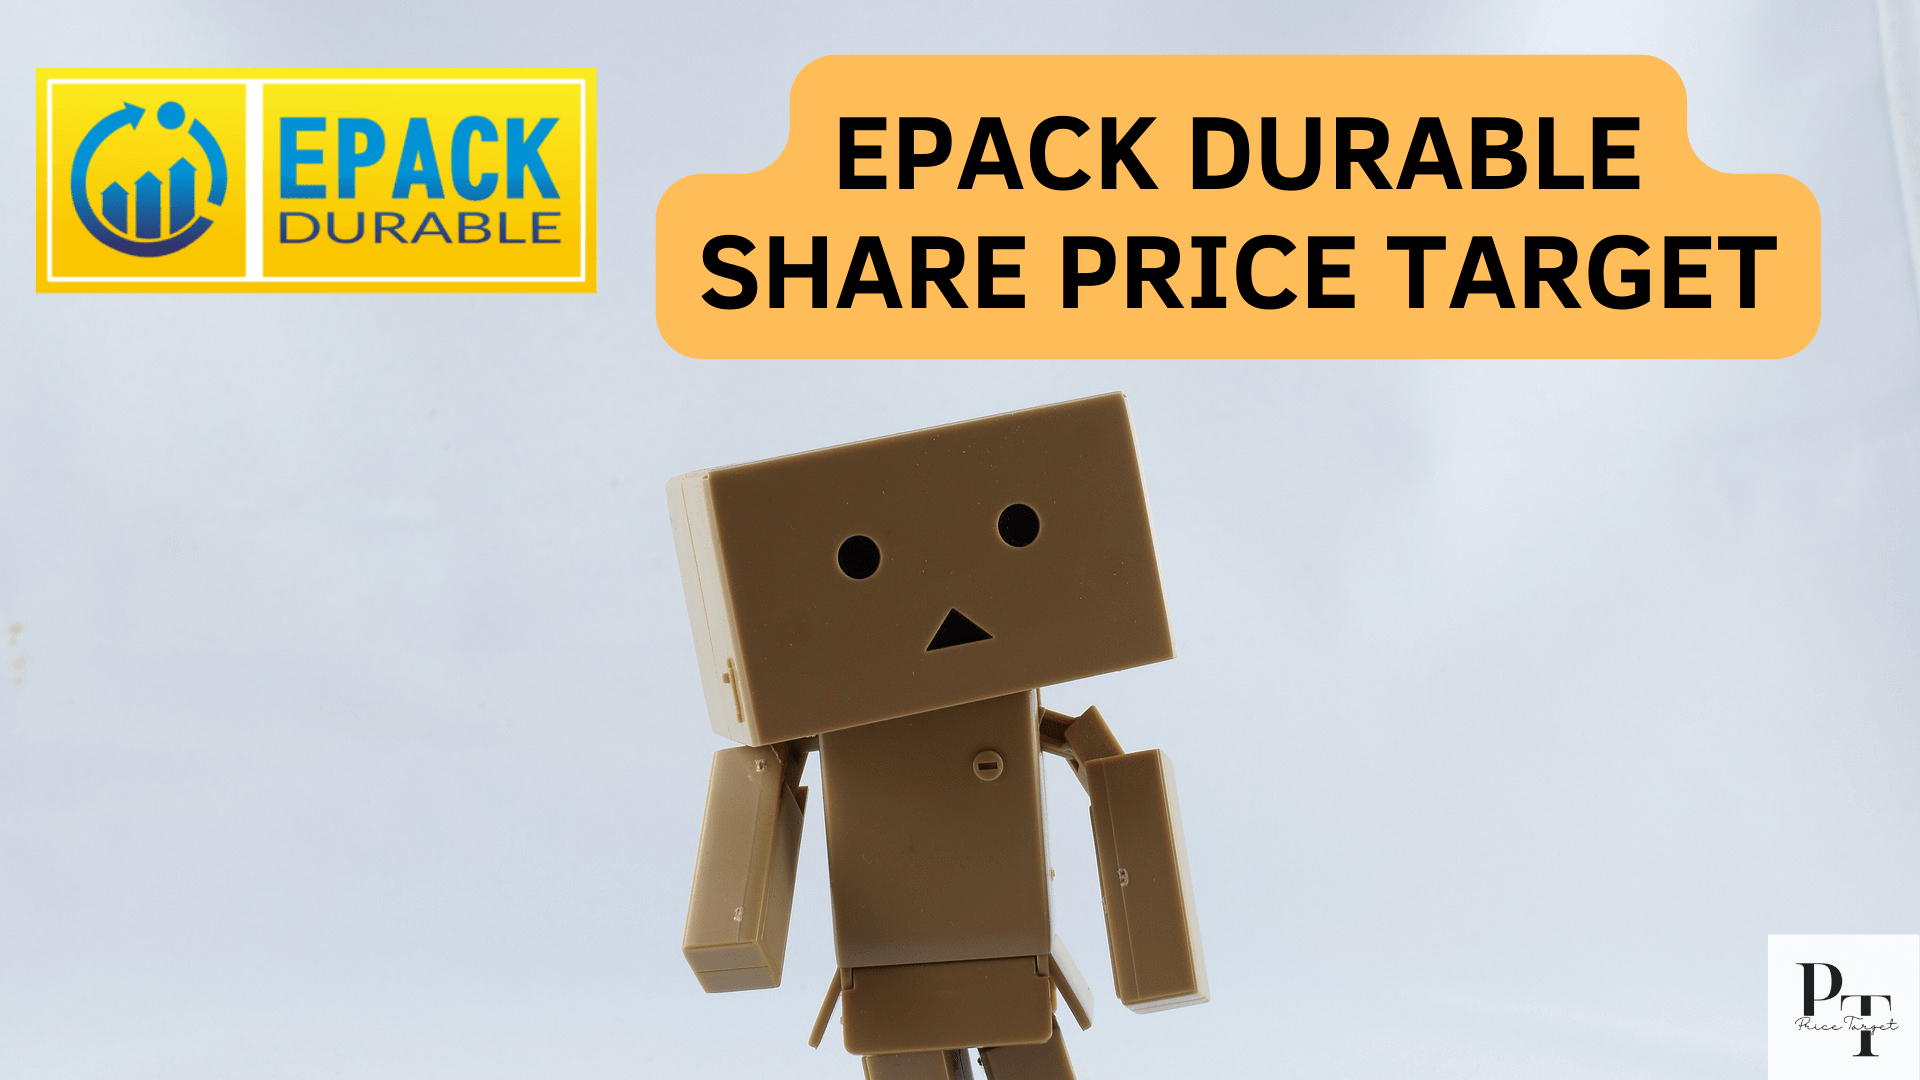 EPACK Durable Share Price Target